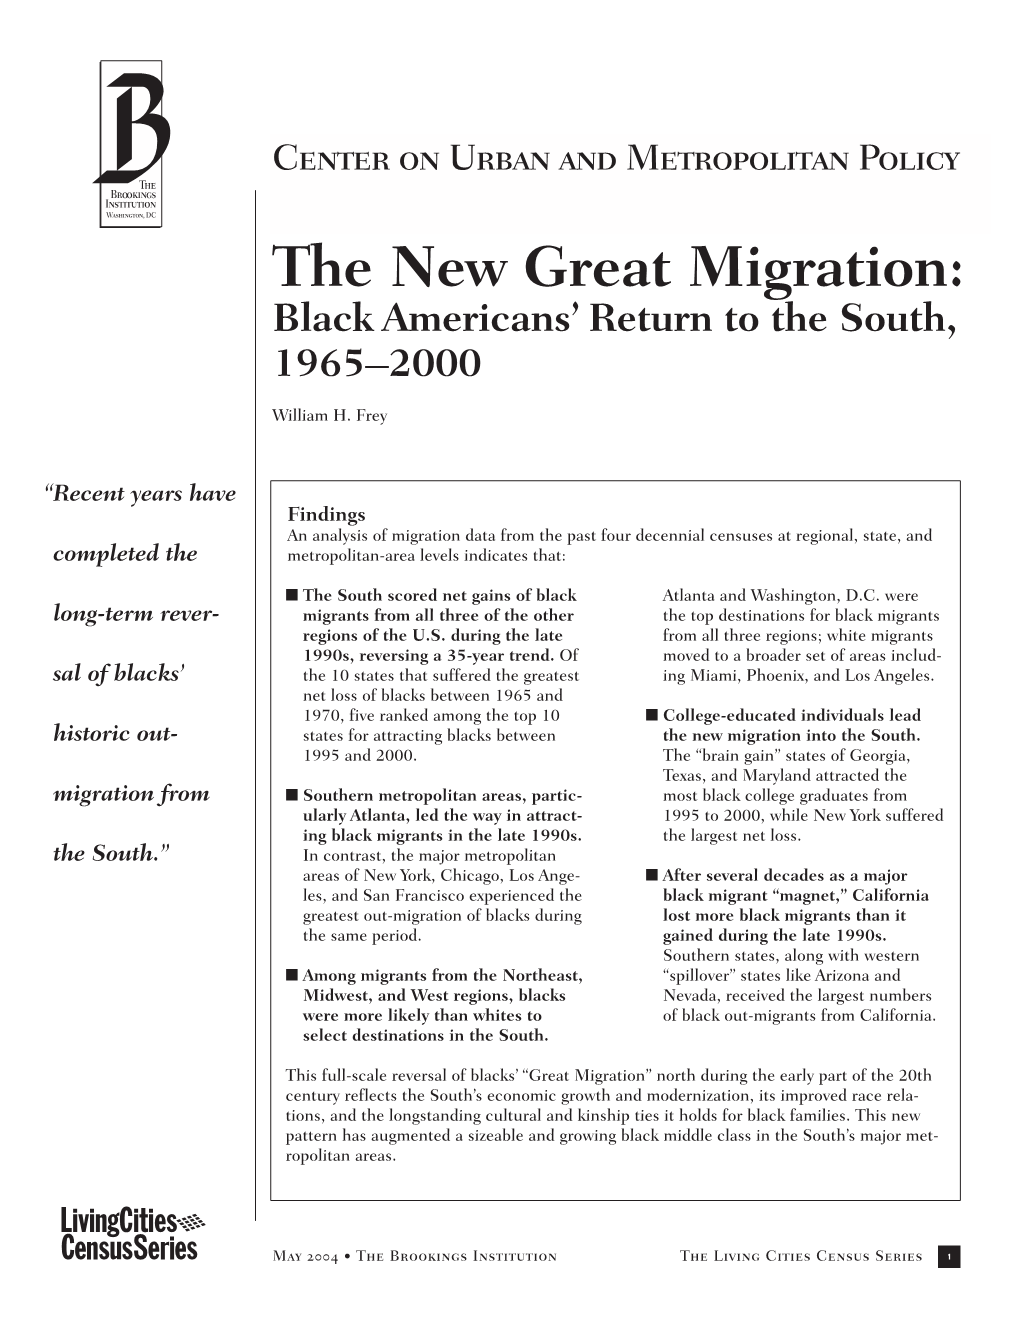 New Great Migration: Black Americans’ Return to the South, 1965–2000